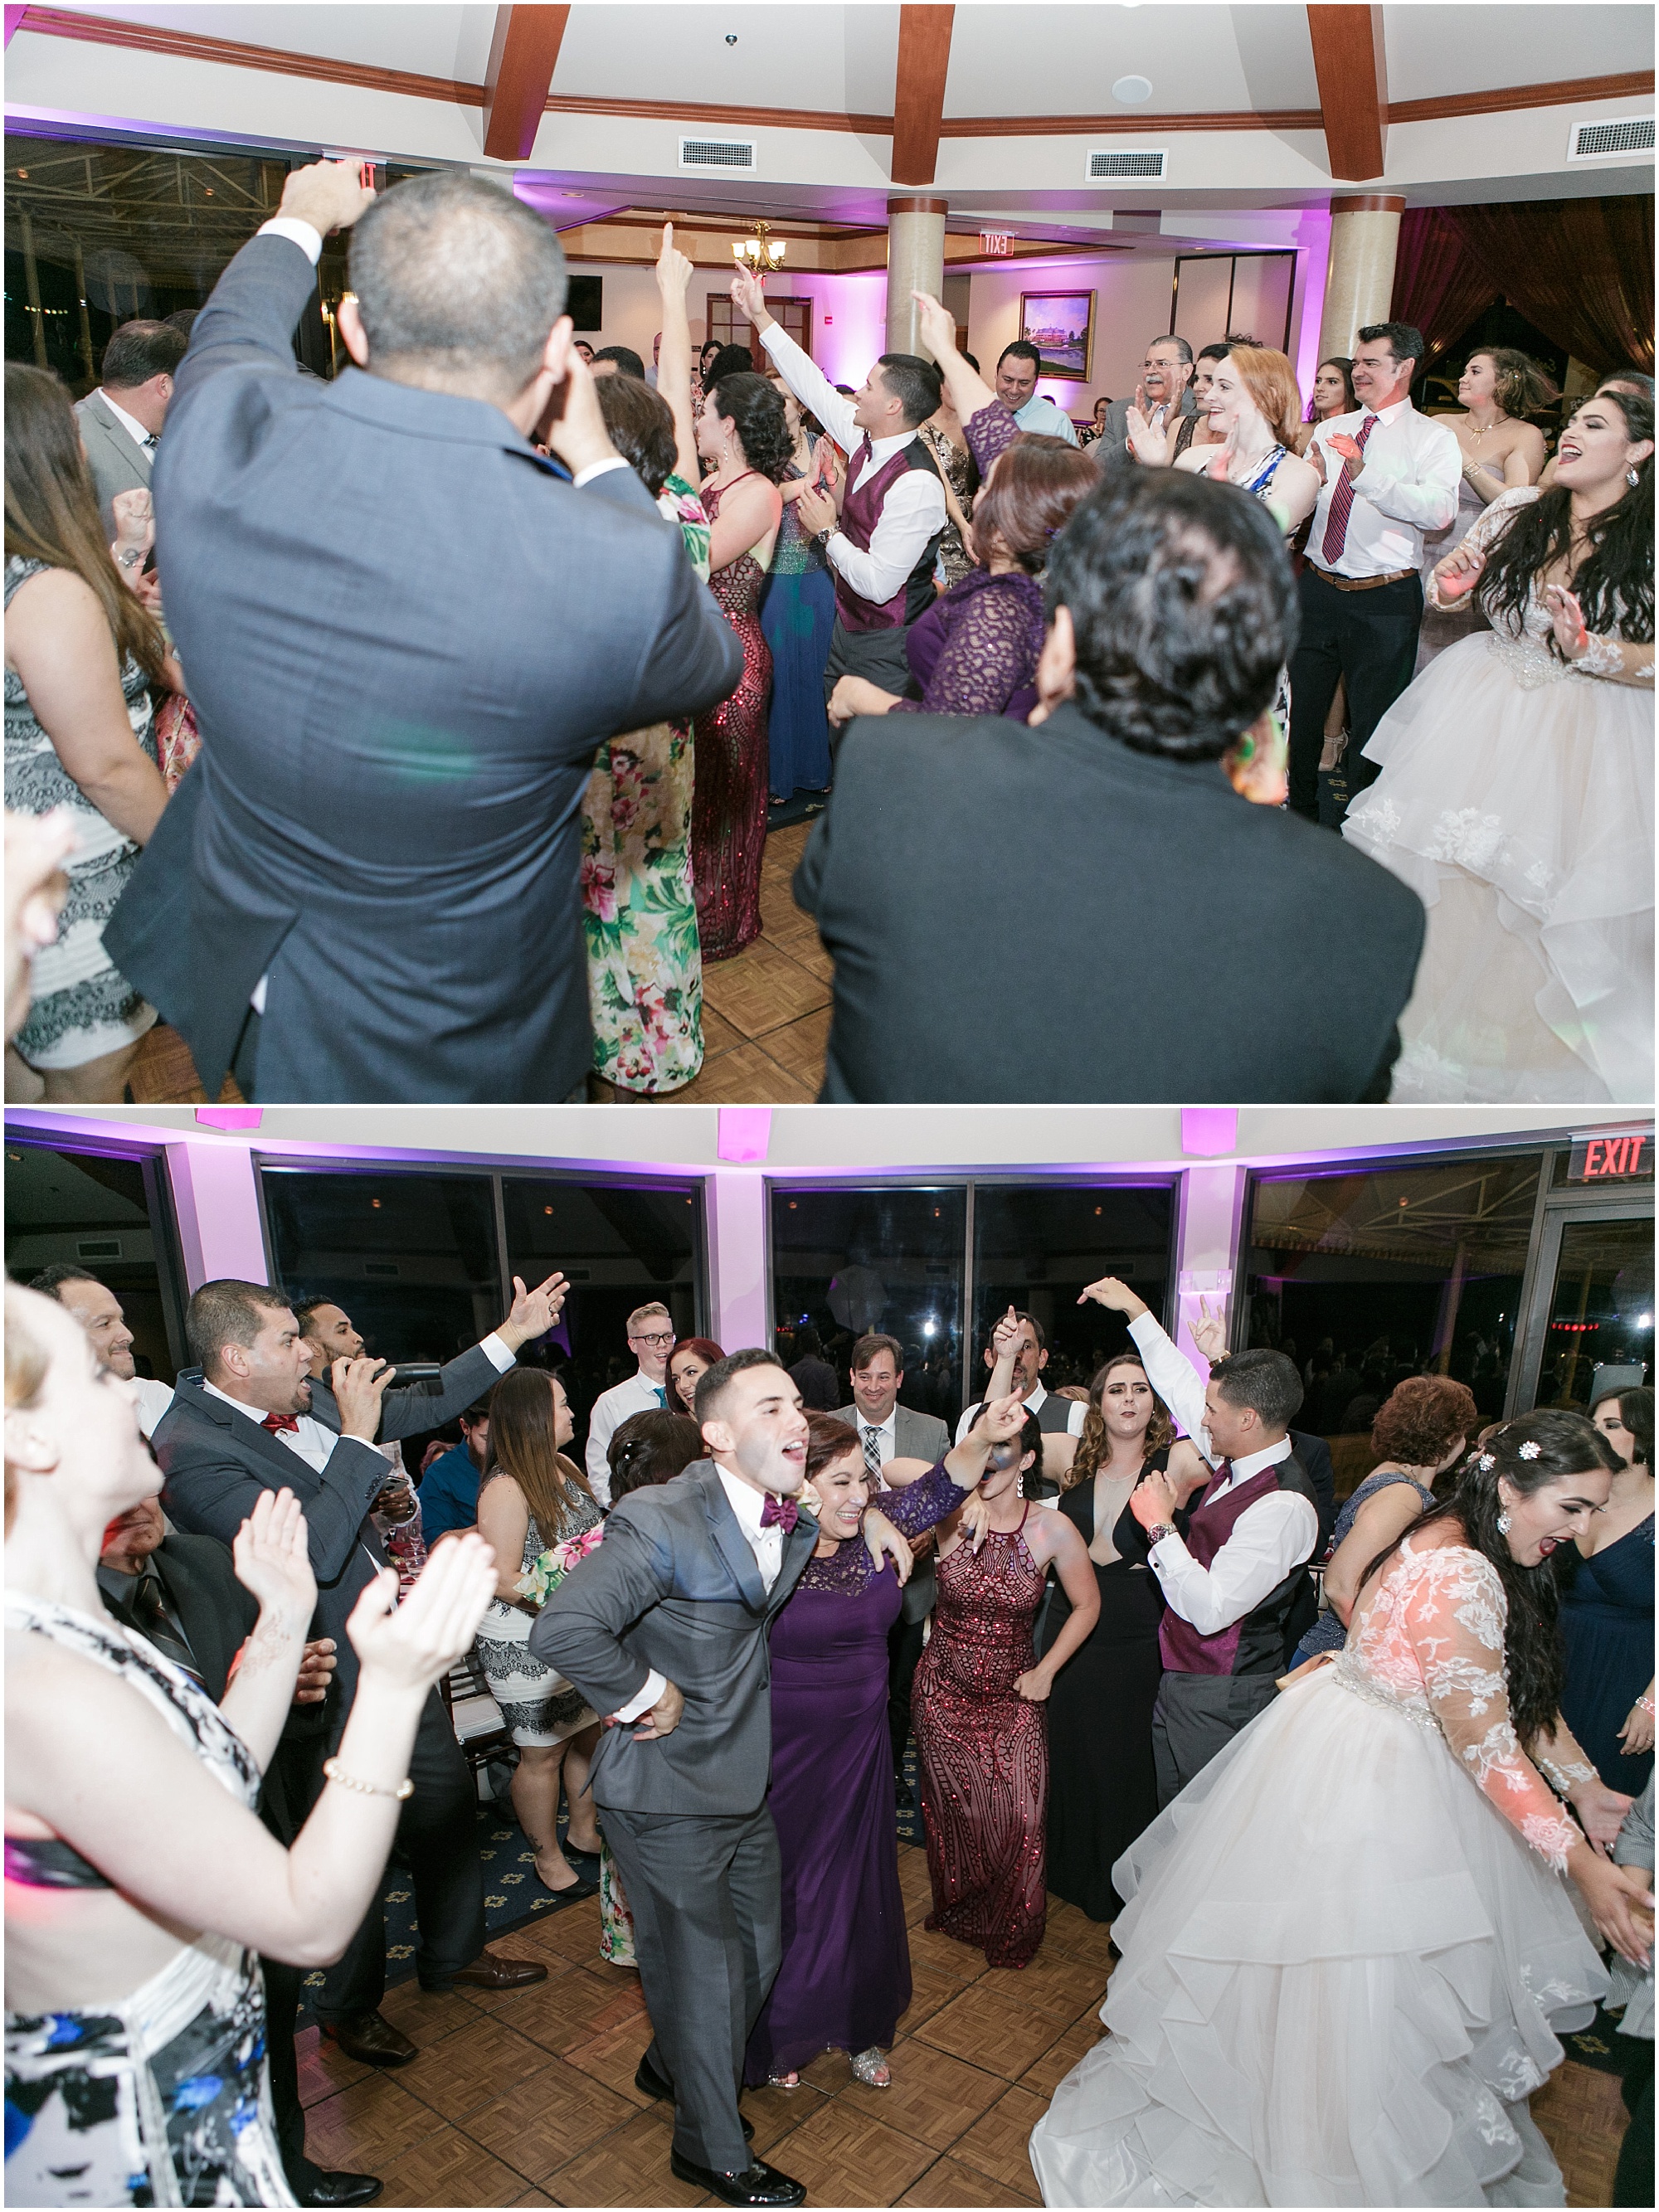 Family and friends dance at wedding reception. 